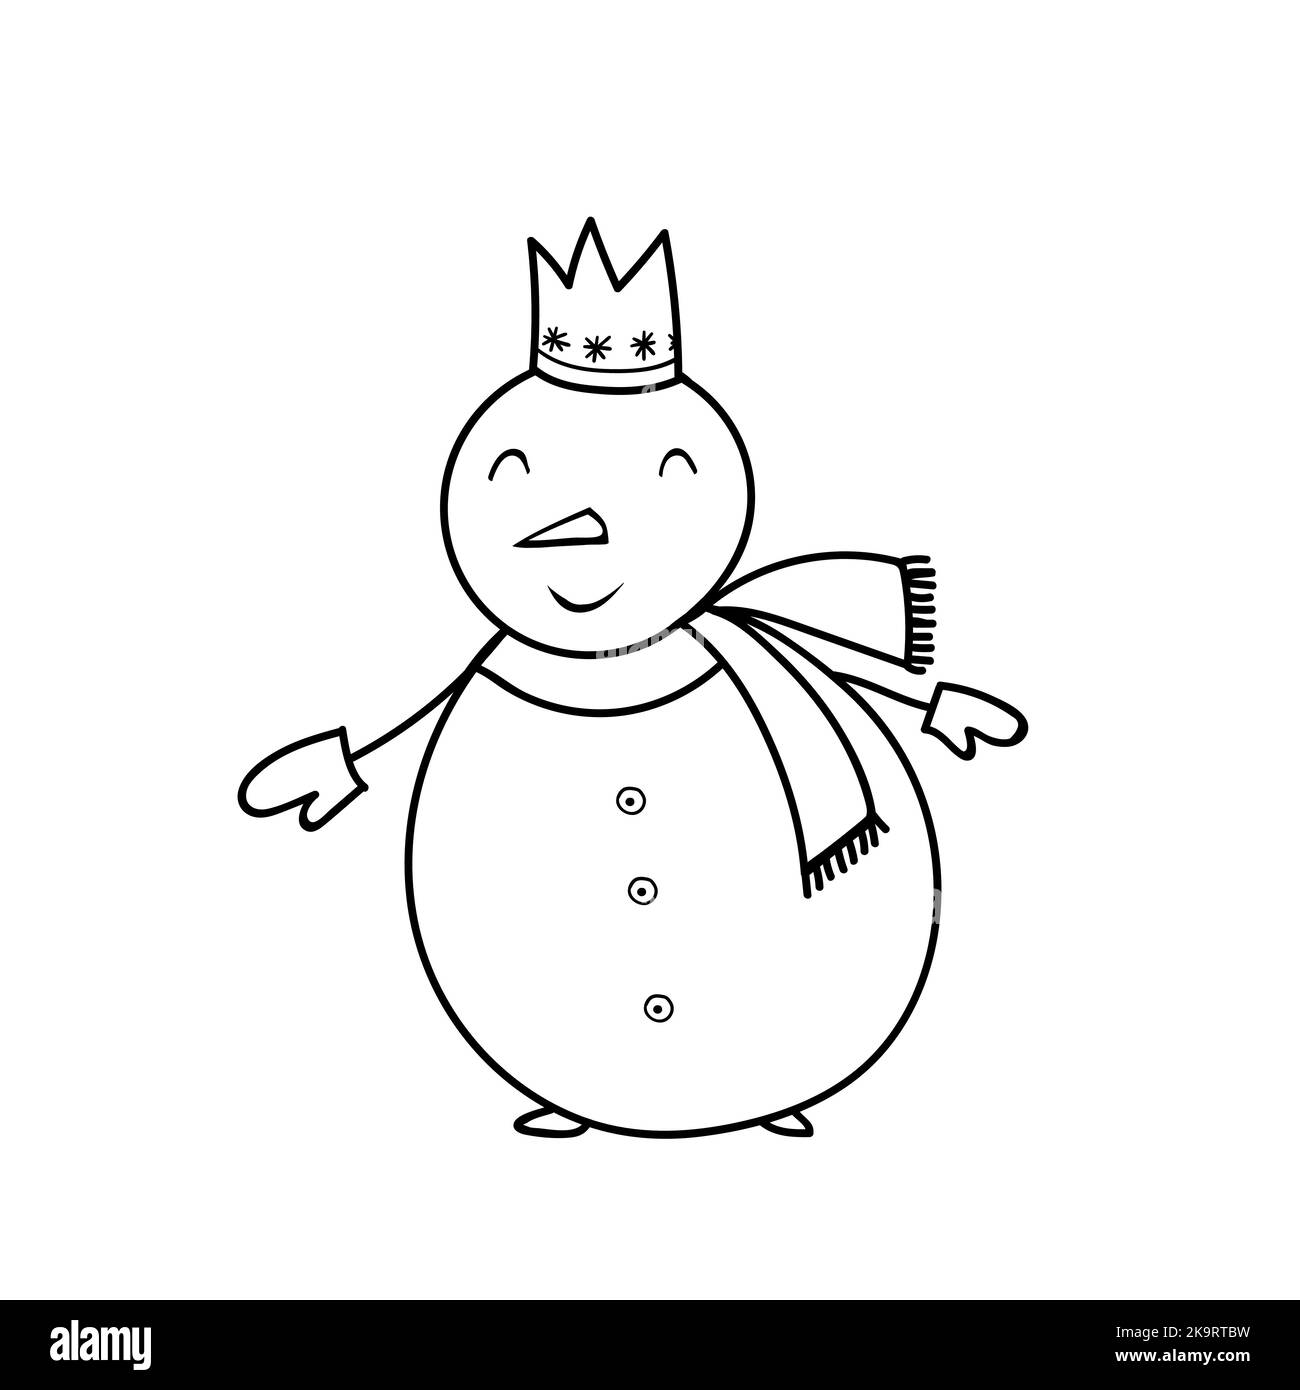 Funny snowman. Outline style illustration for coloring book, stickers, cards. Stock Vector